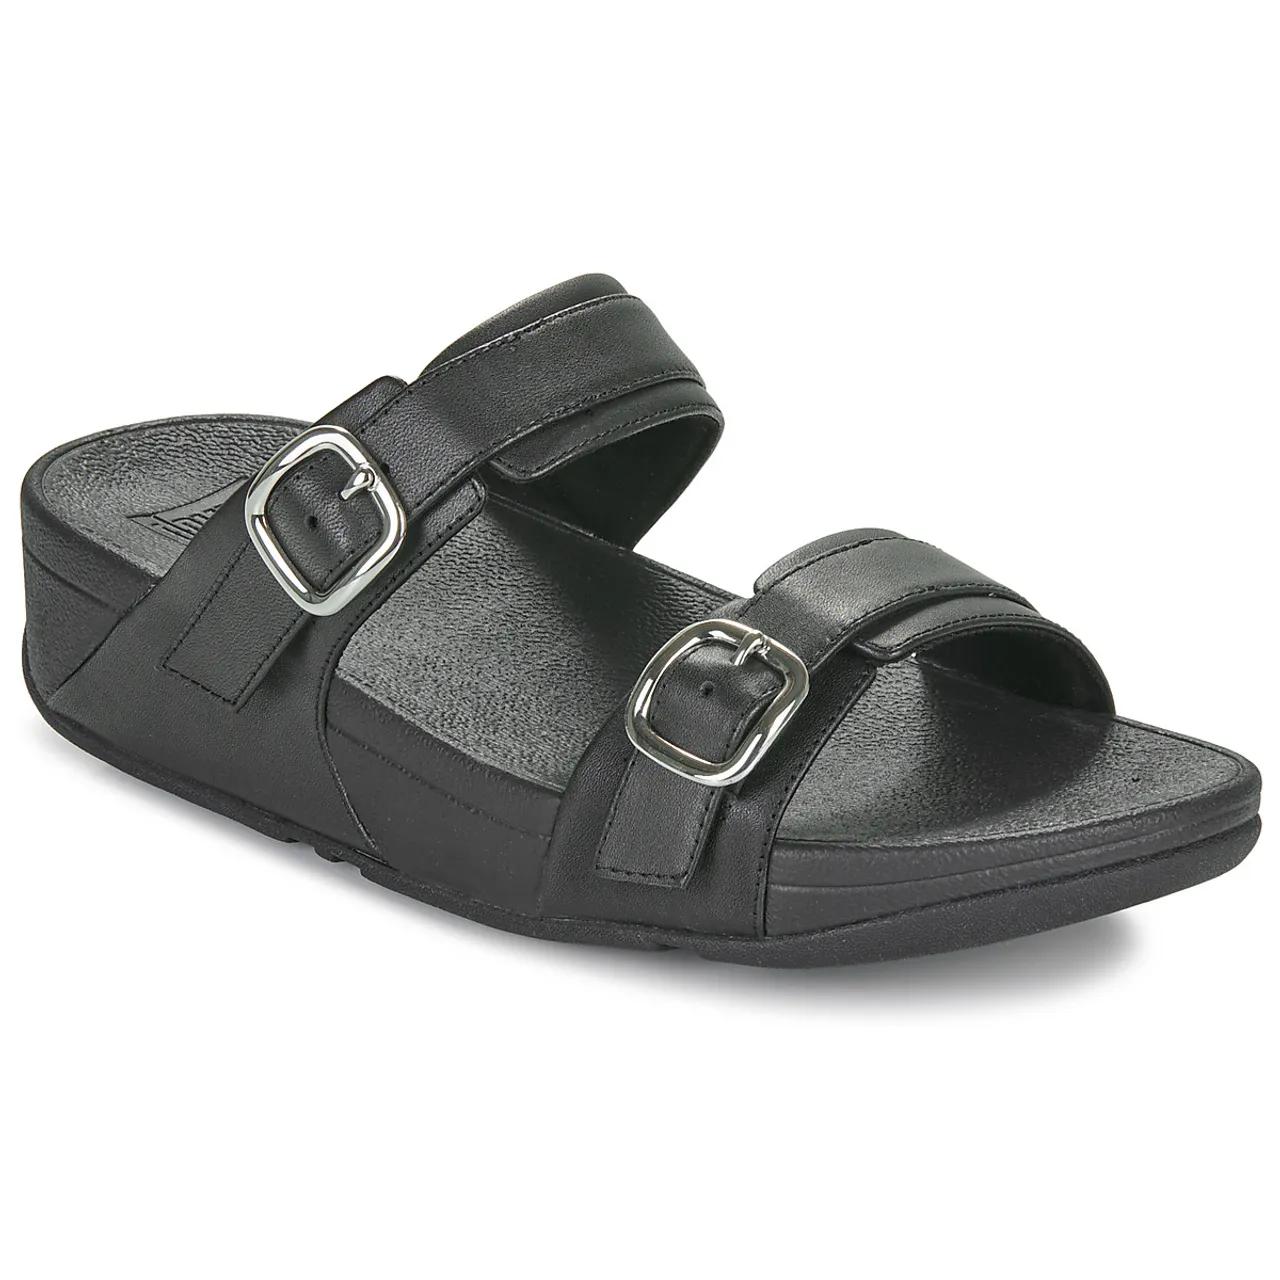 FitFlop  Lulu Adjustable Leather Slides  women's Mules / Casual Shoes in Black